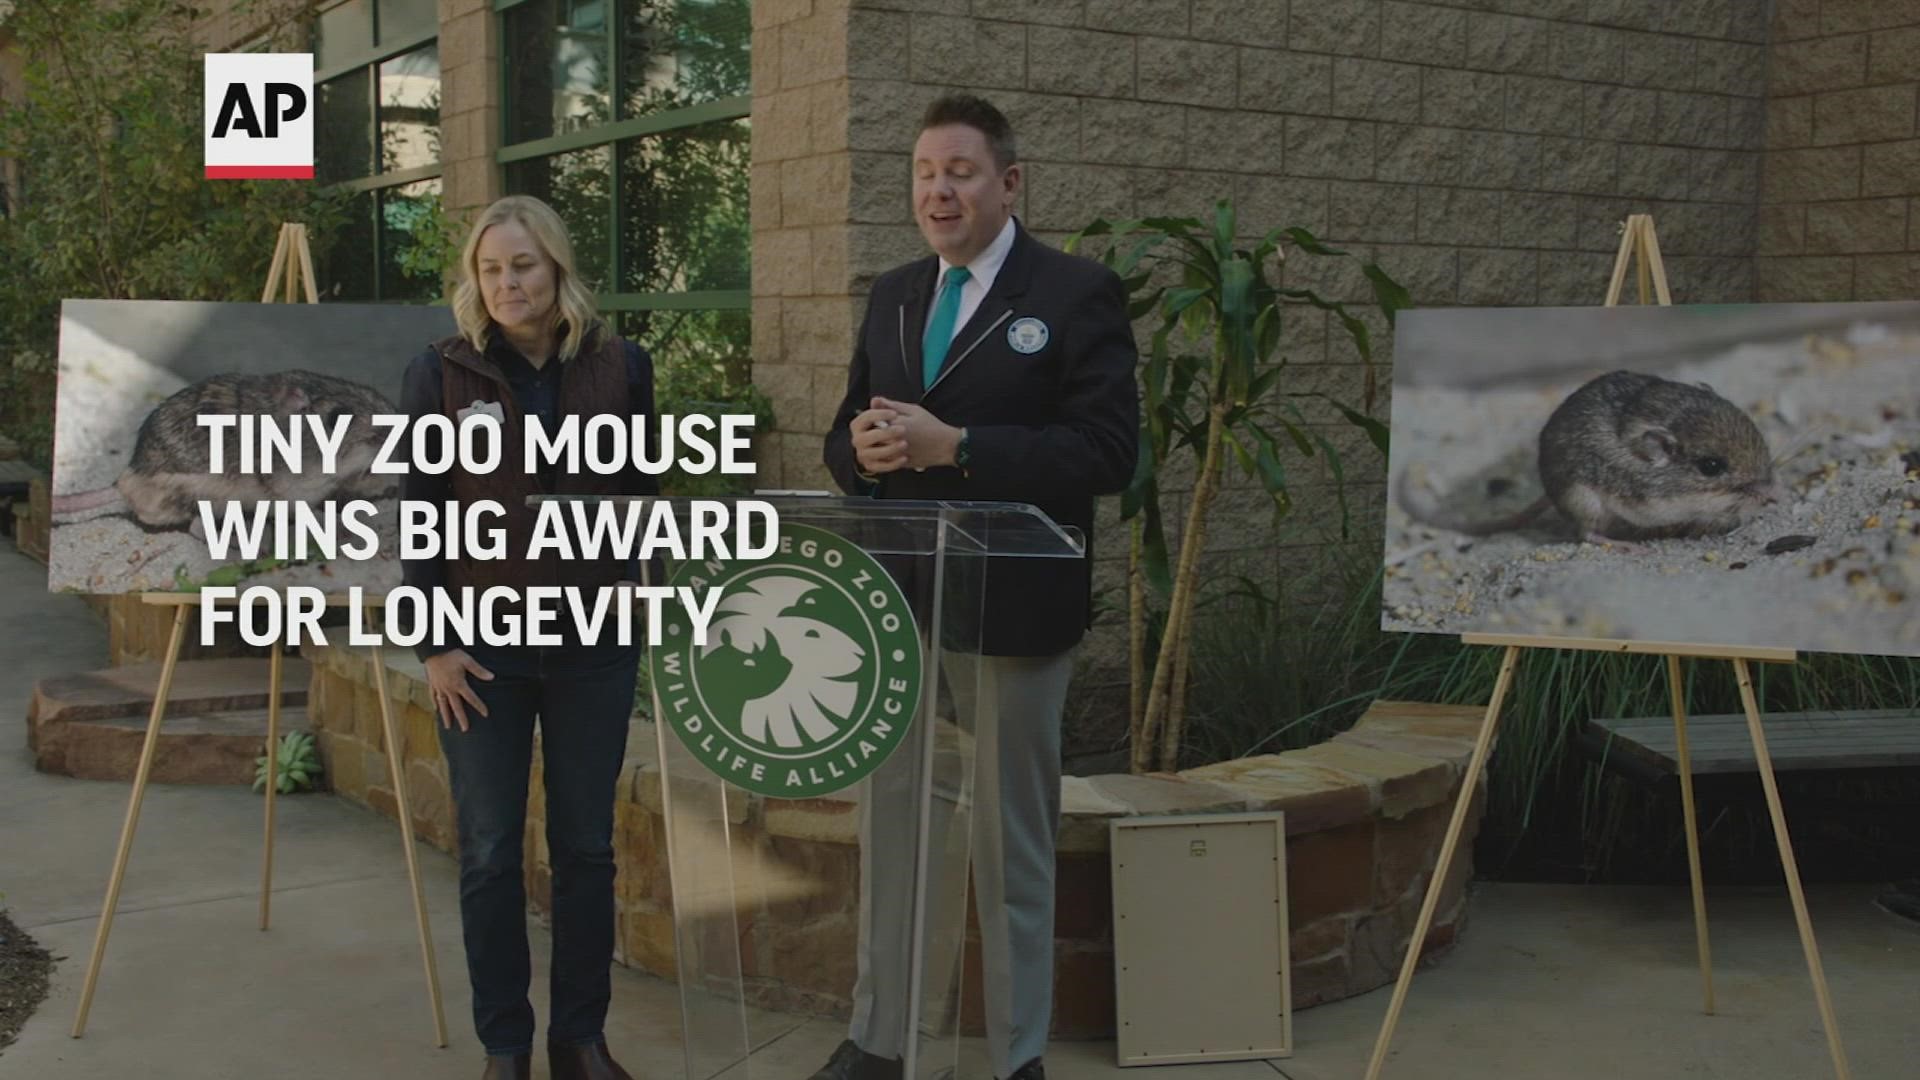 Pat, born nearly a decade ago at the San Diego Zoo Safari Park, is officially the oldest living mouse in human care.